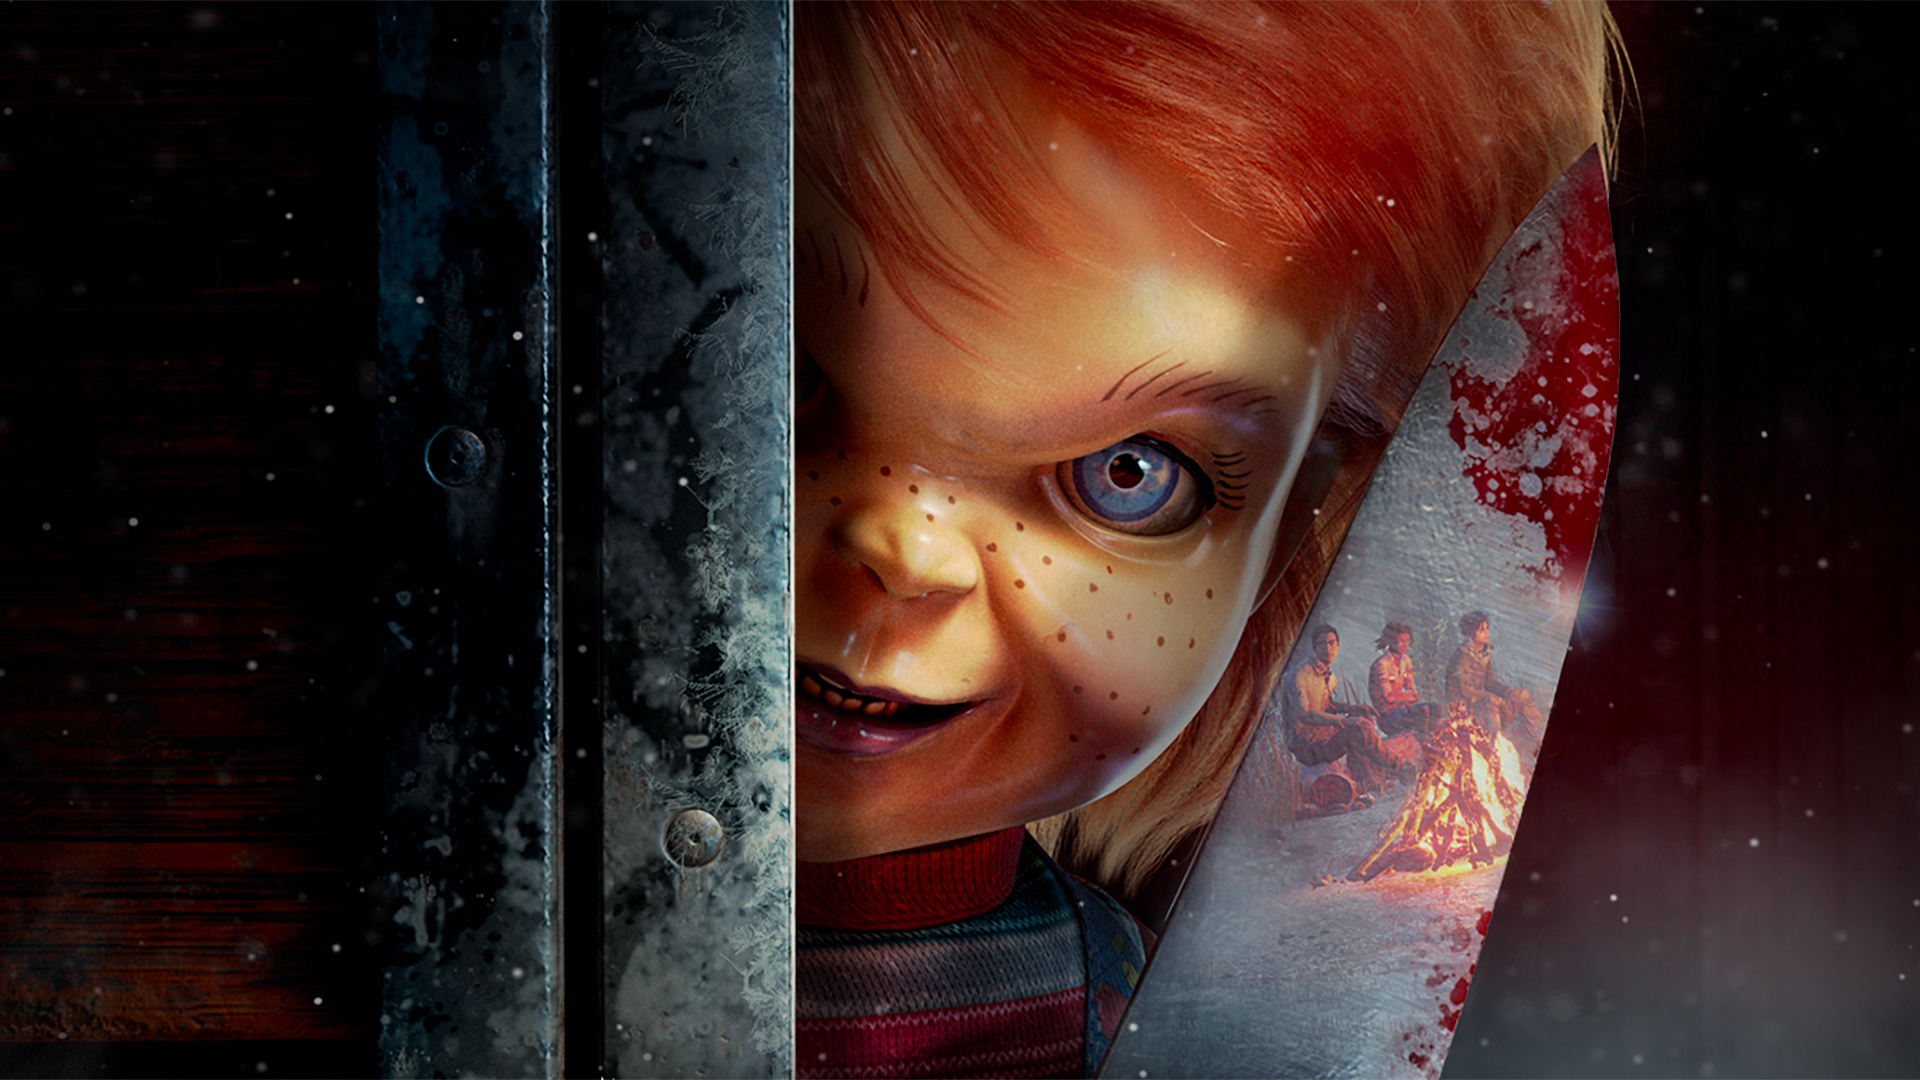 Artwork of Chucky peeking around a door and wielding a knife that is reflecting Dead by Daylight survivors huddled around a campfire